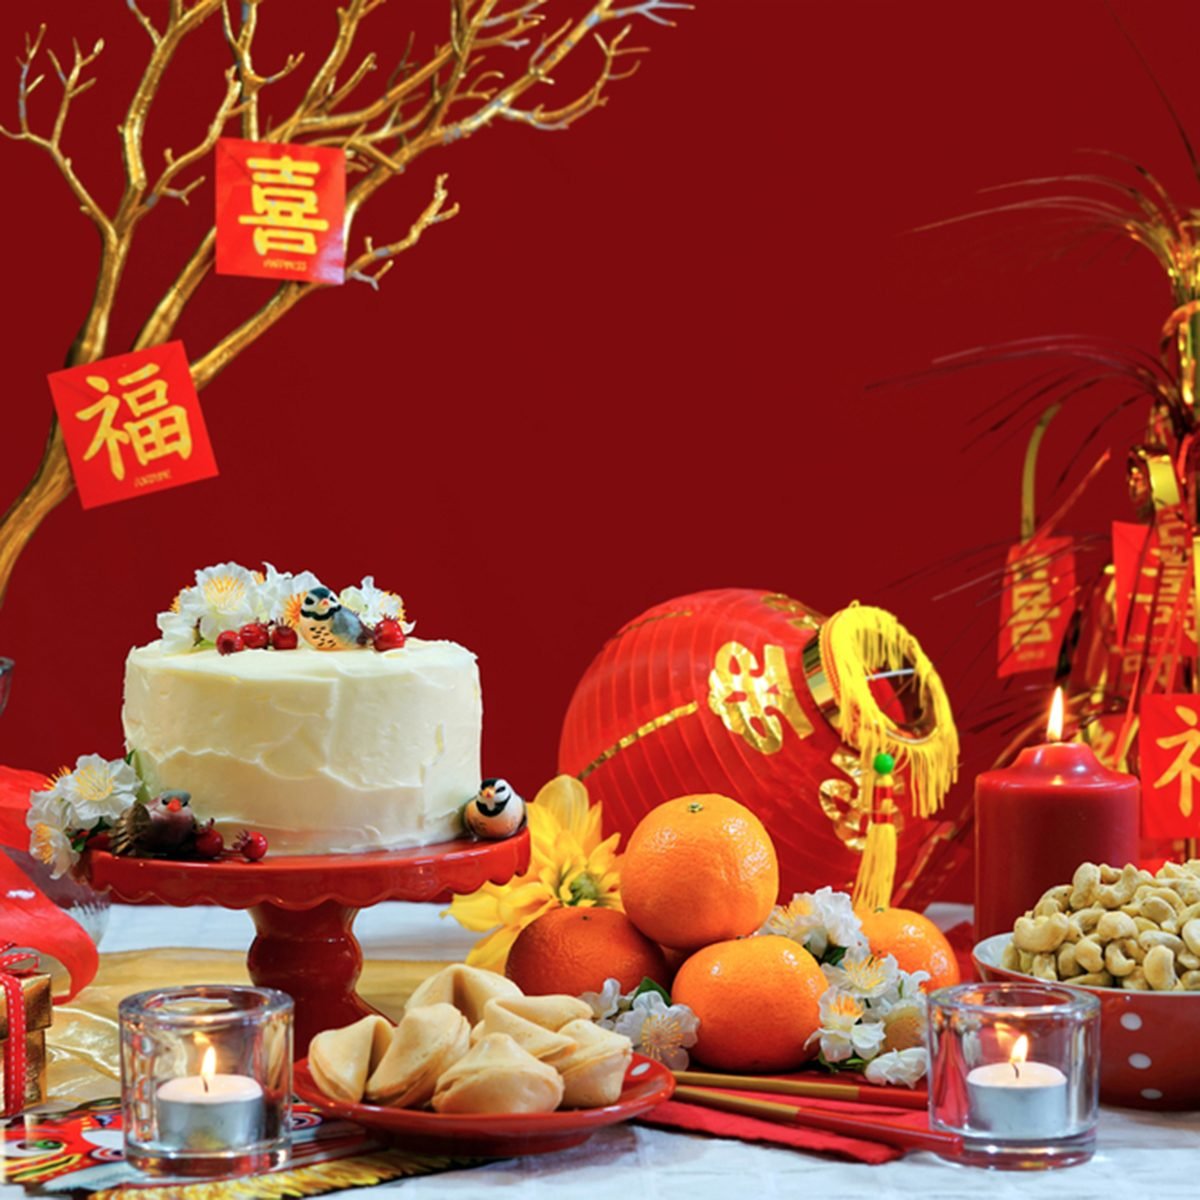 How to Throw a Chinese New Year Party | Taste of Home